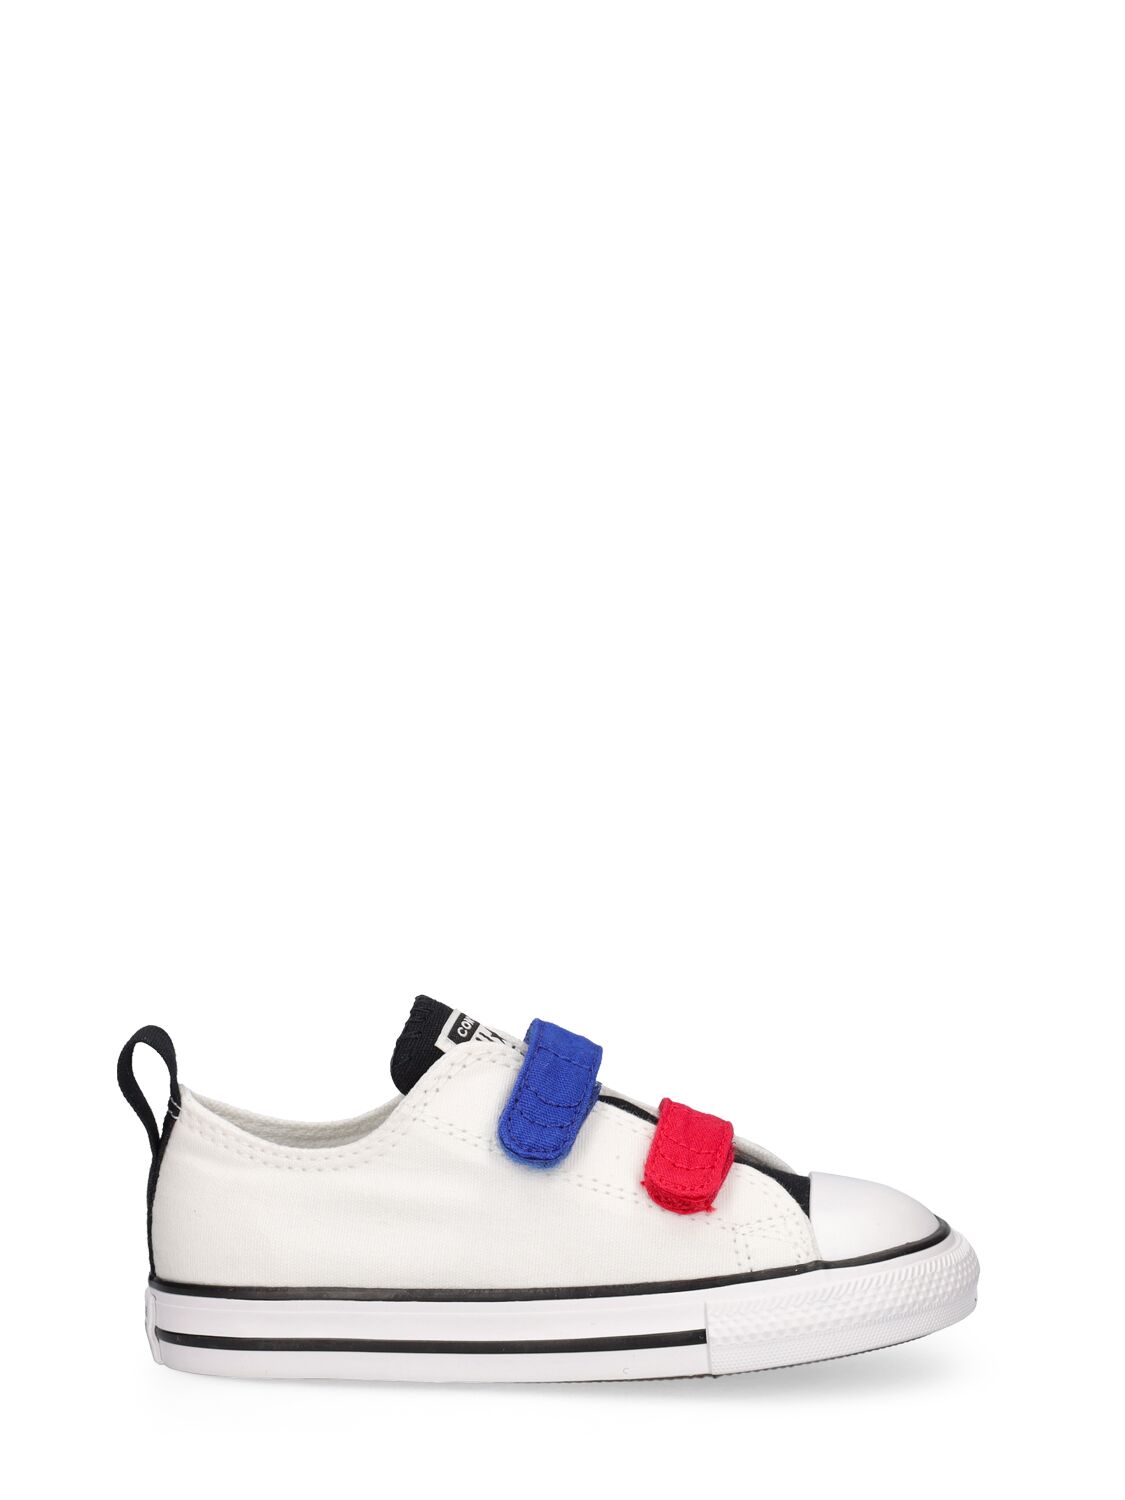 Image of Chuck Taylor Canvas Strap Sneakers